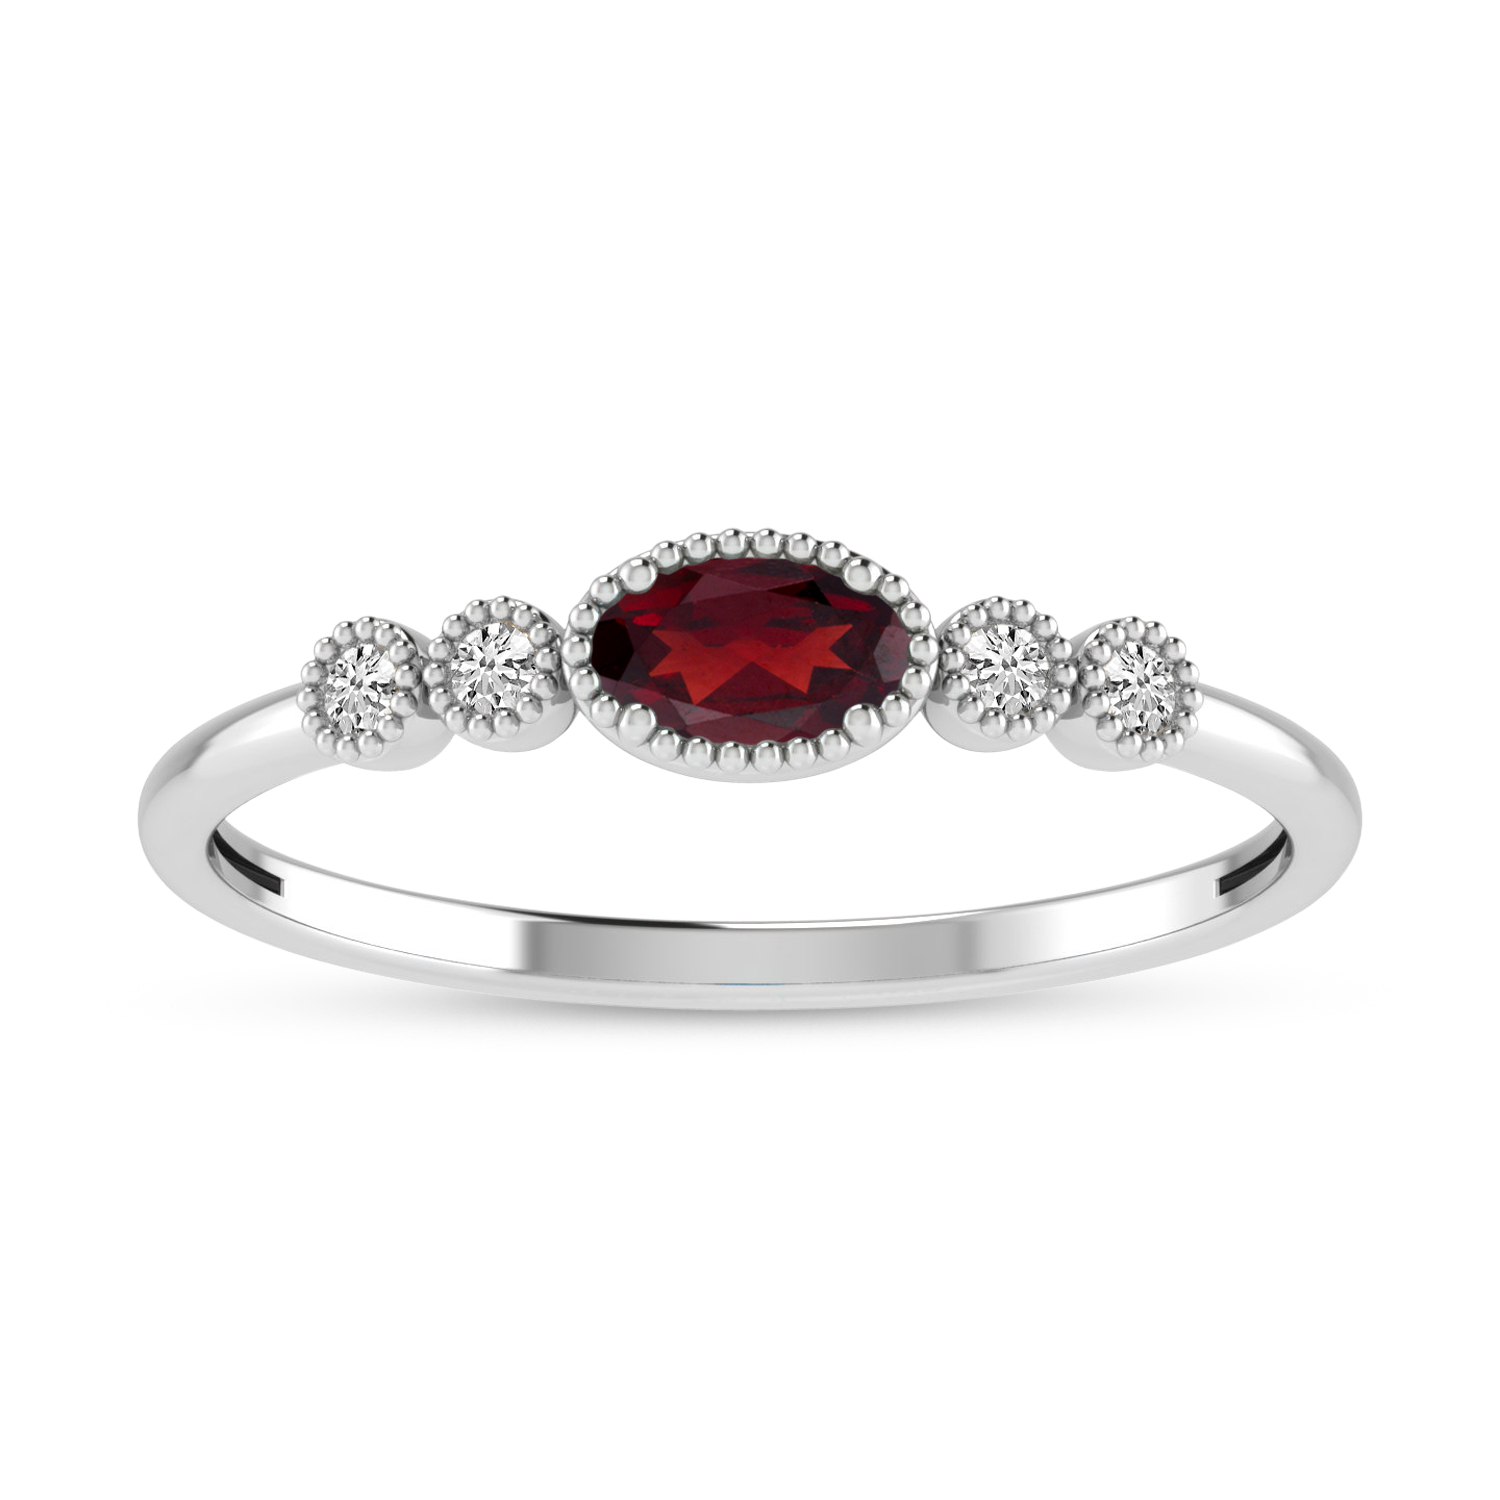 10K White Gold Oval Garnet and Diamond Stackable Ring